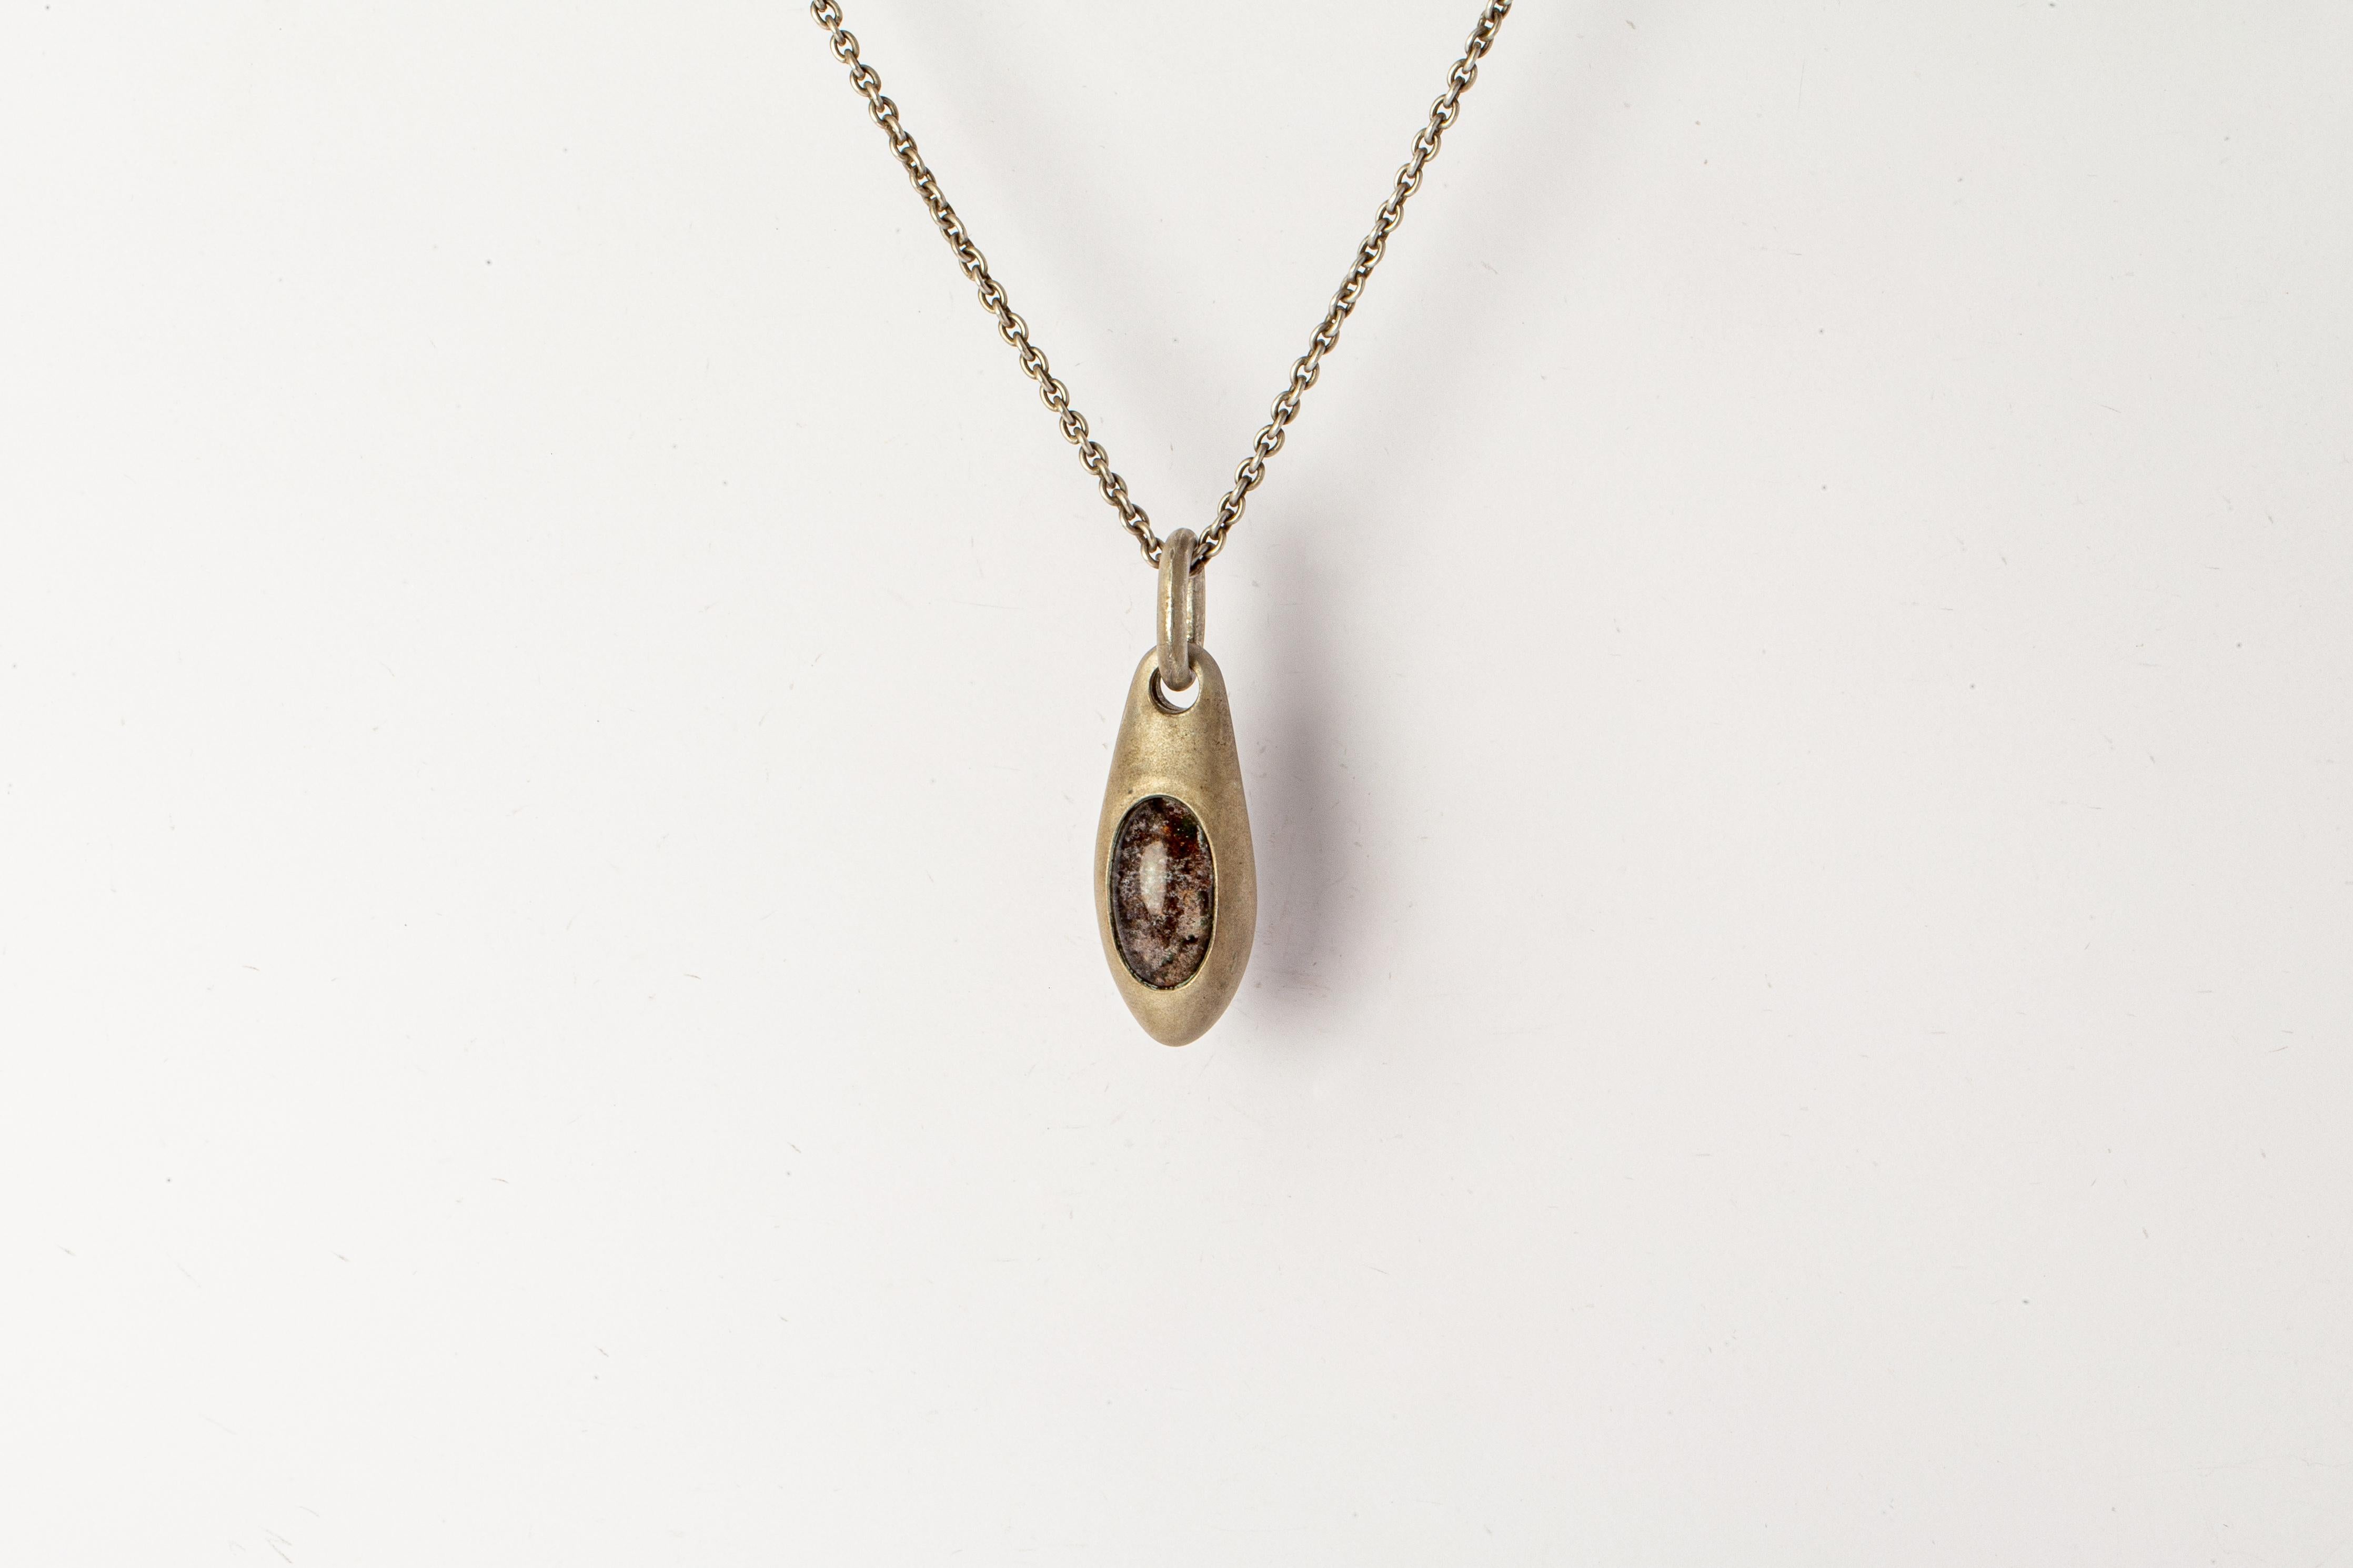 Necklace in the shape of chrysalis made in sterling silver and a slab of lodolite. Sterling silver, dipped in acid to create a subdued surface. It comes on 74 cm sterling silver chain.
This item is made with a naturally occurring element and will